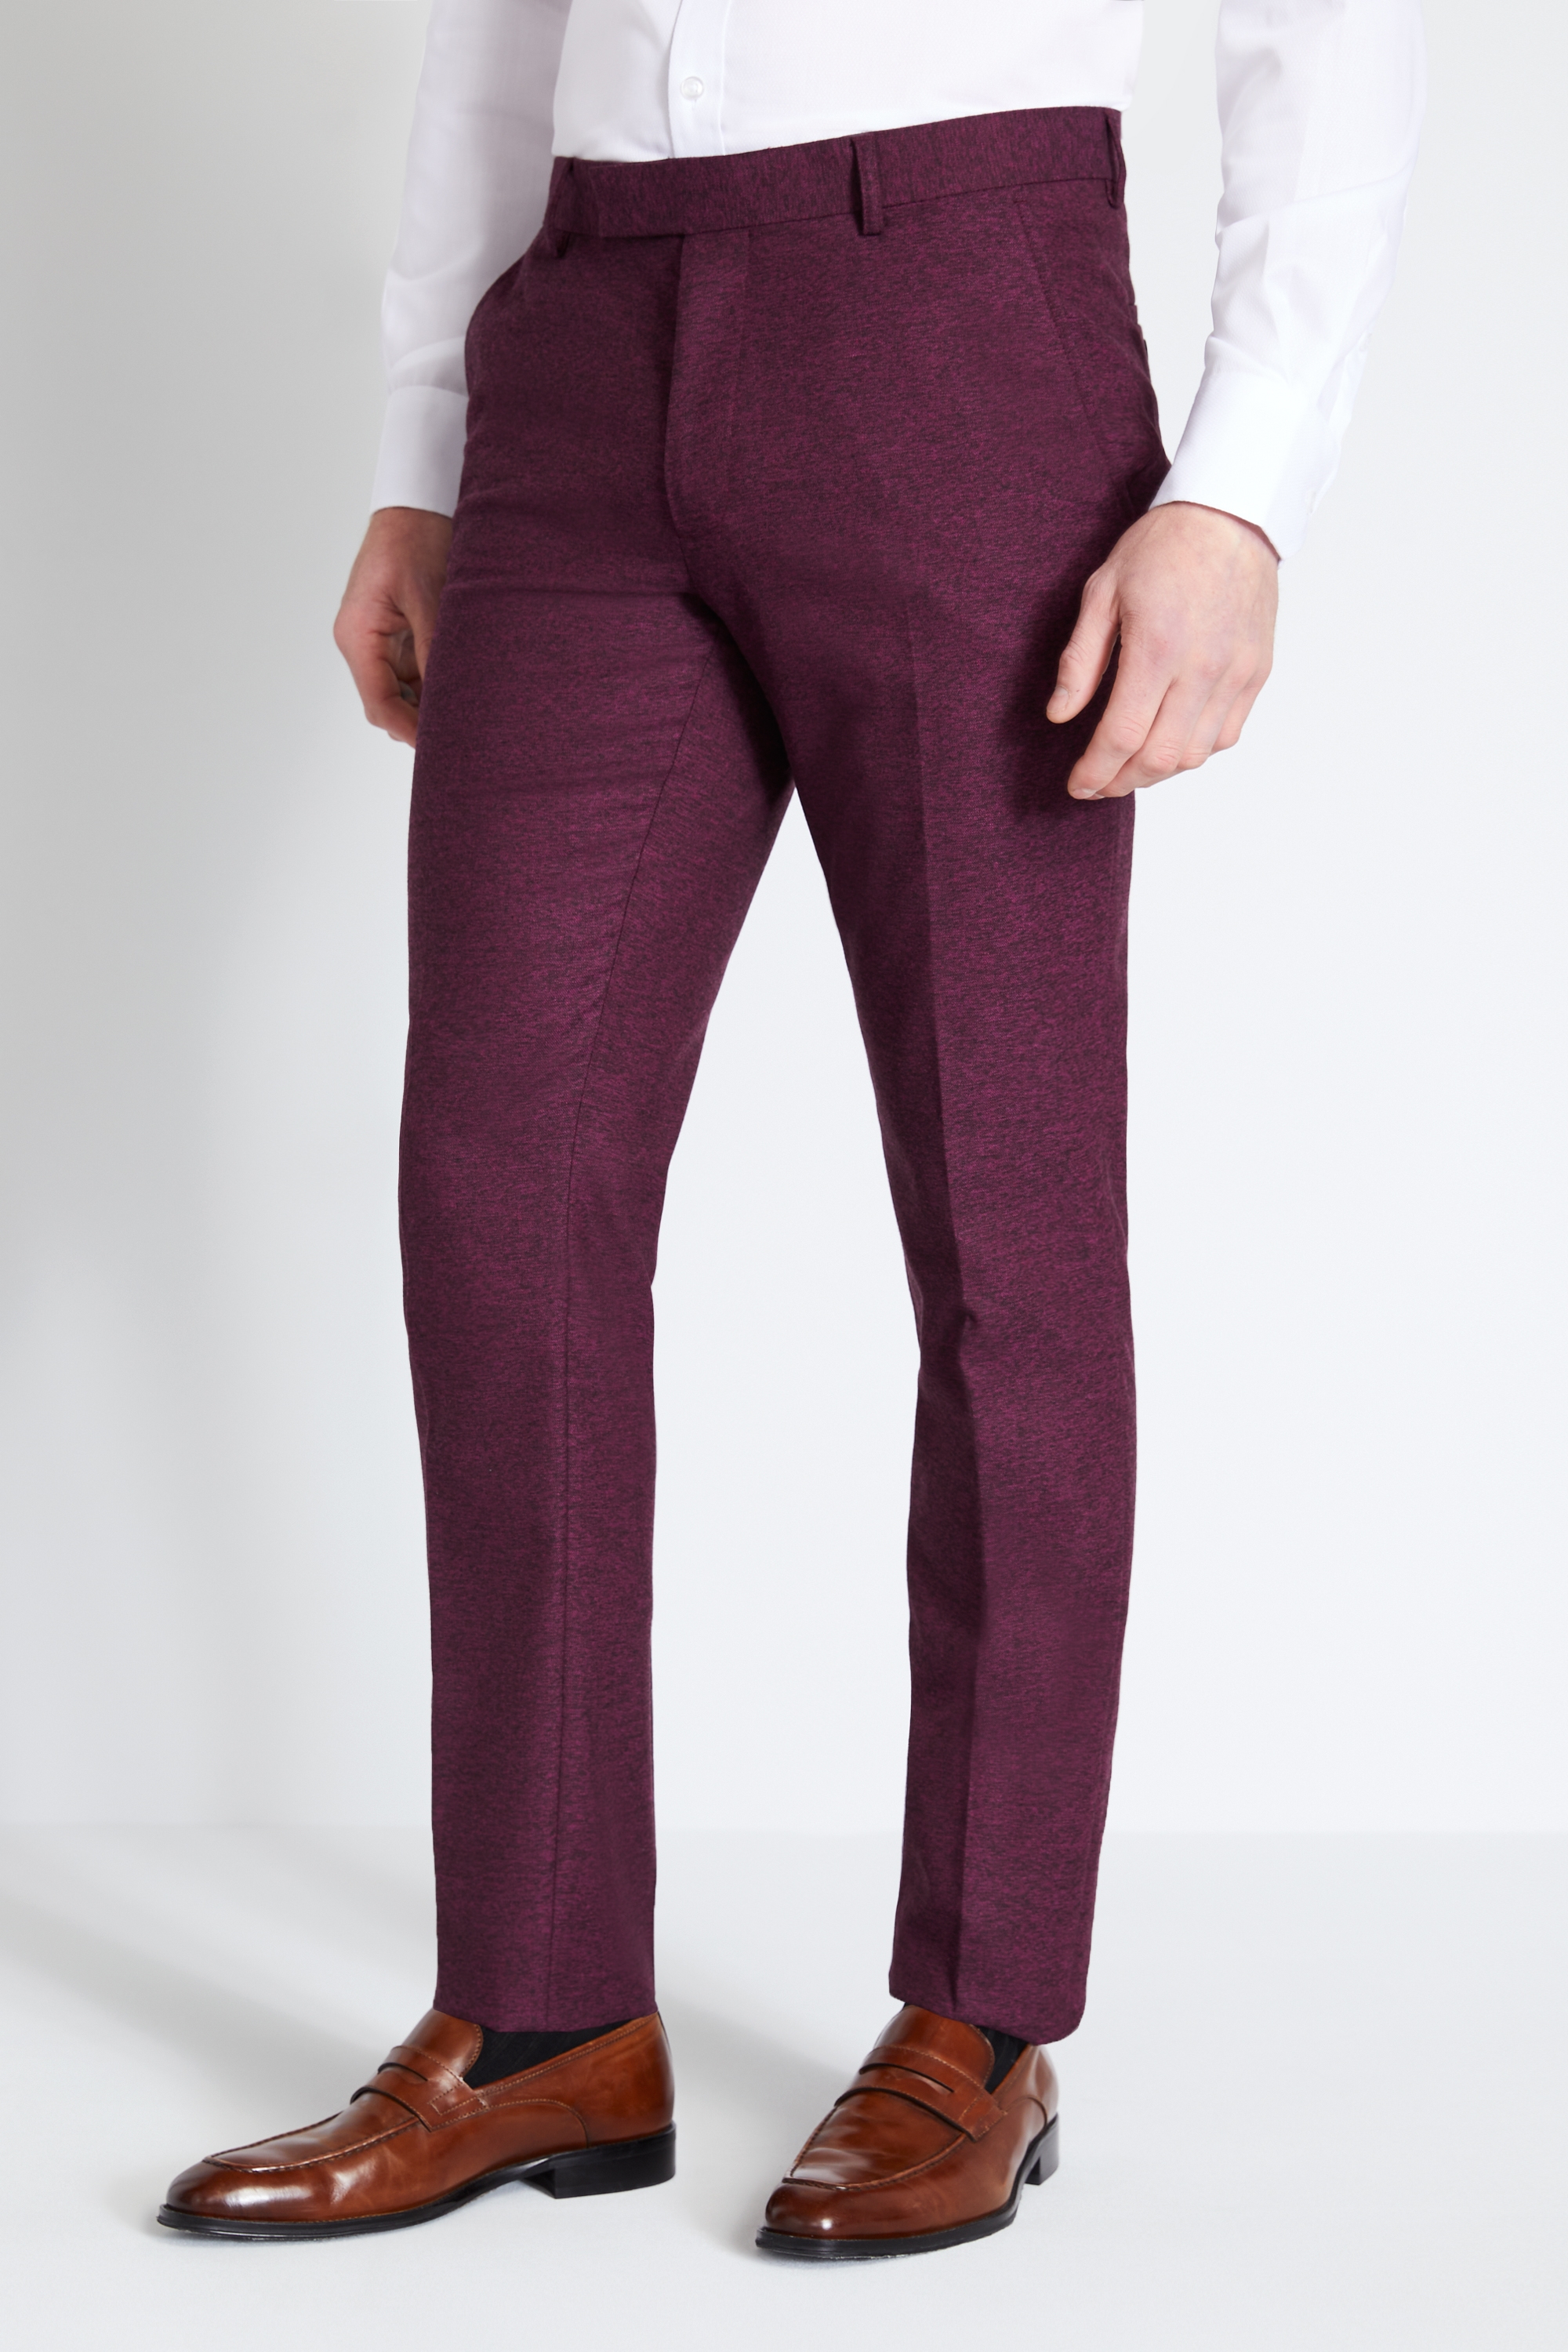 Slim Fit Fuchsia Berry Trousers | Buy Online at Moss